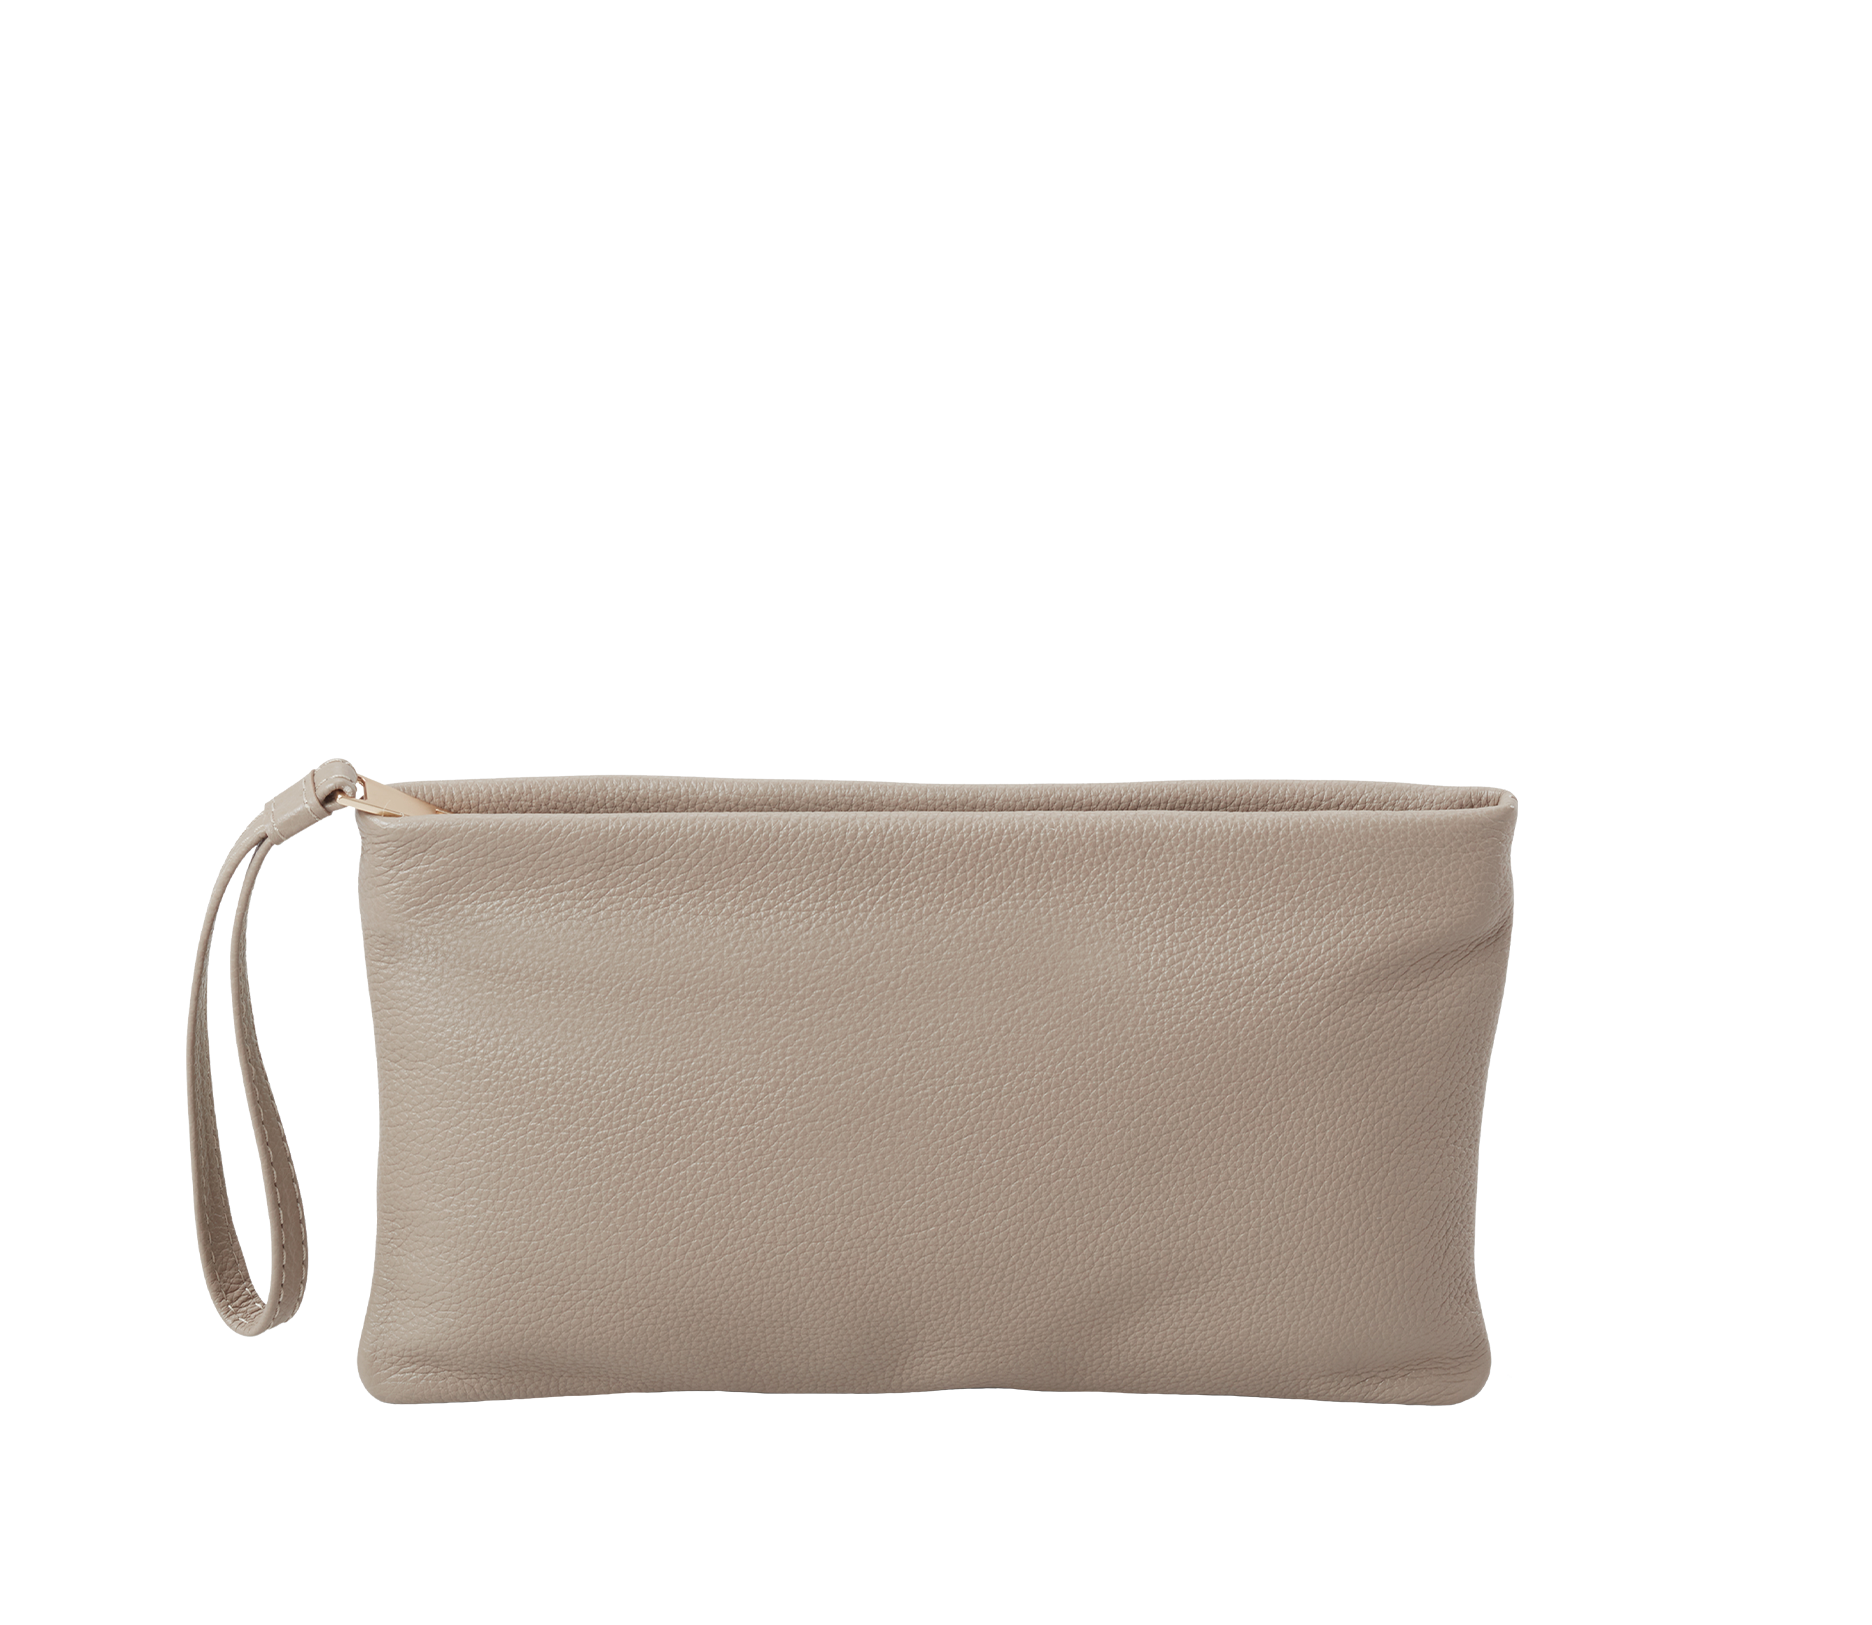 Alexis Travel Clutch in Clay